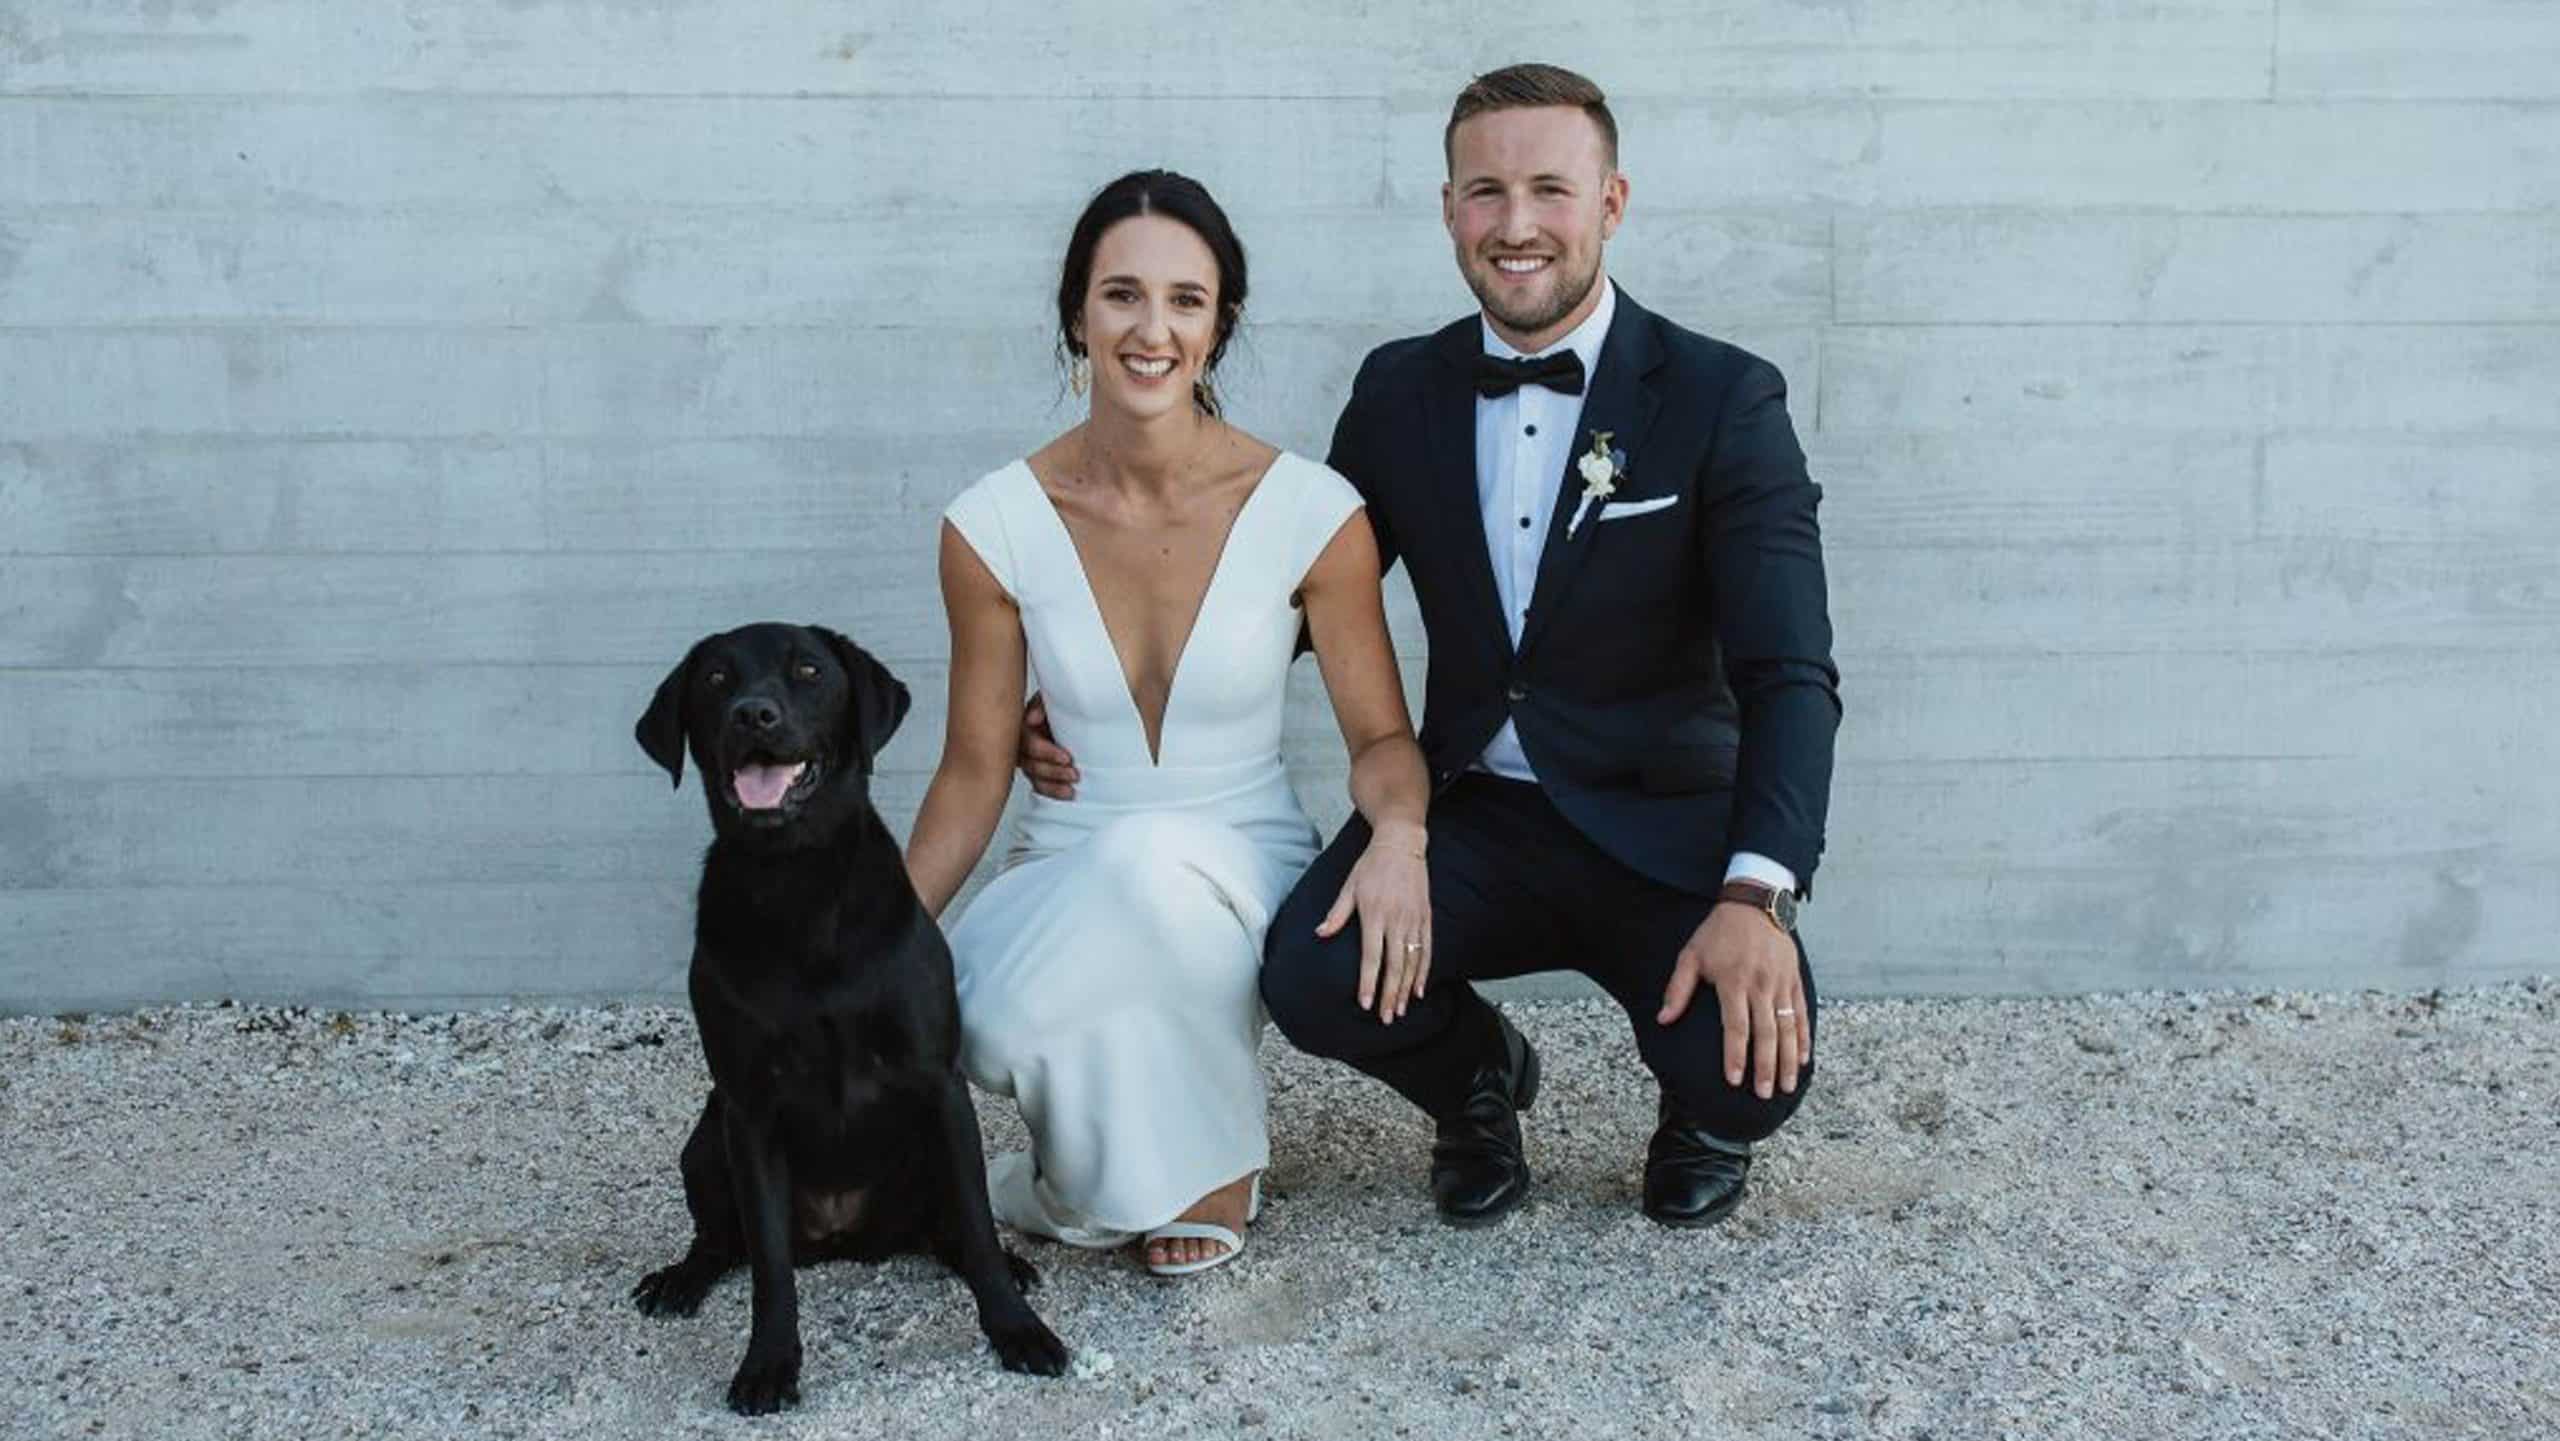 Bridal party photos with dog